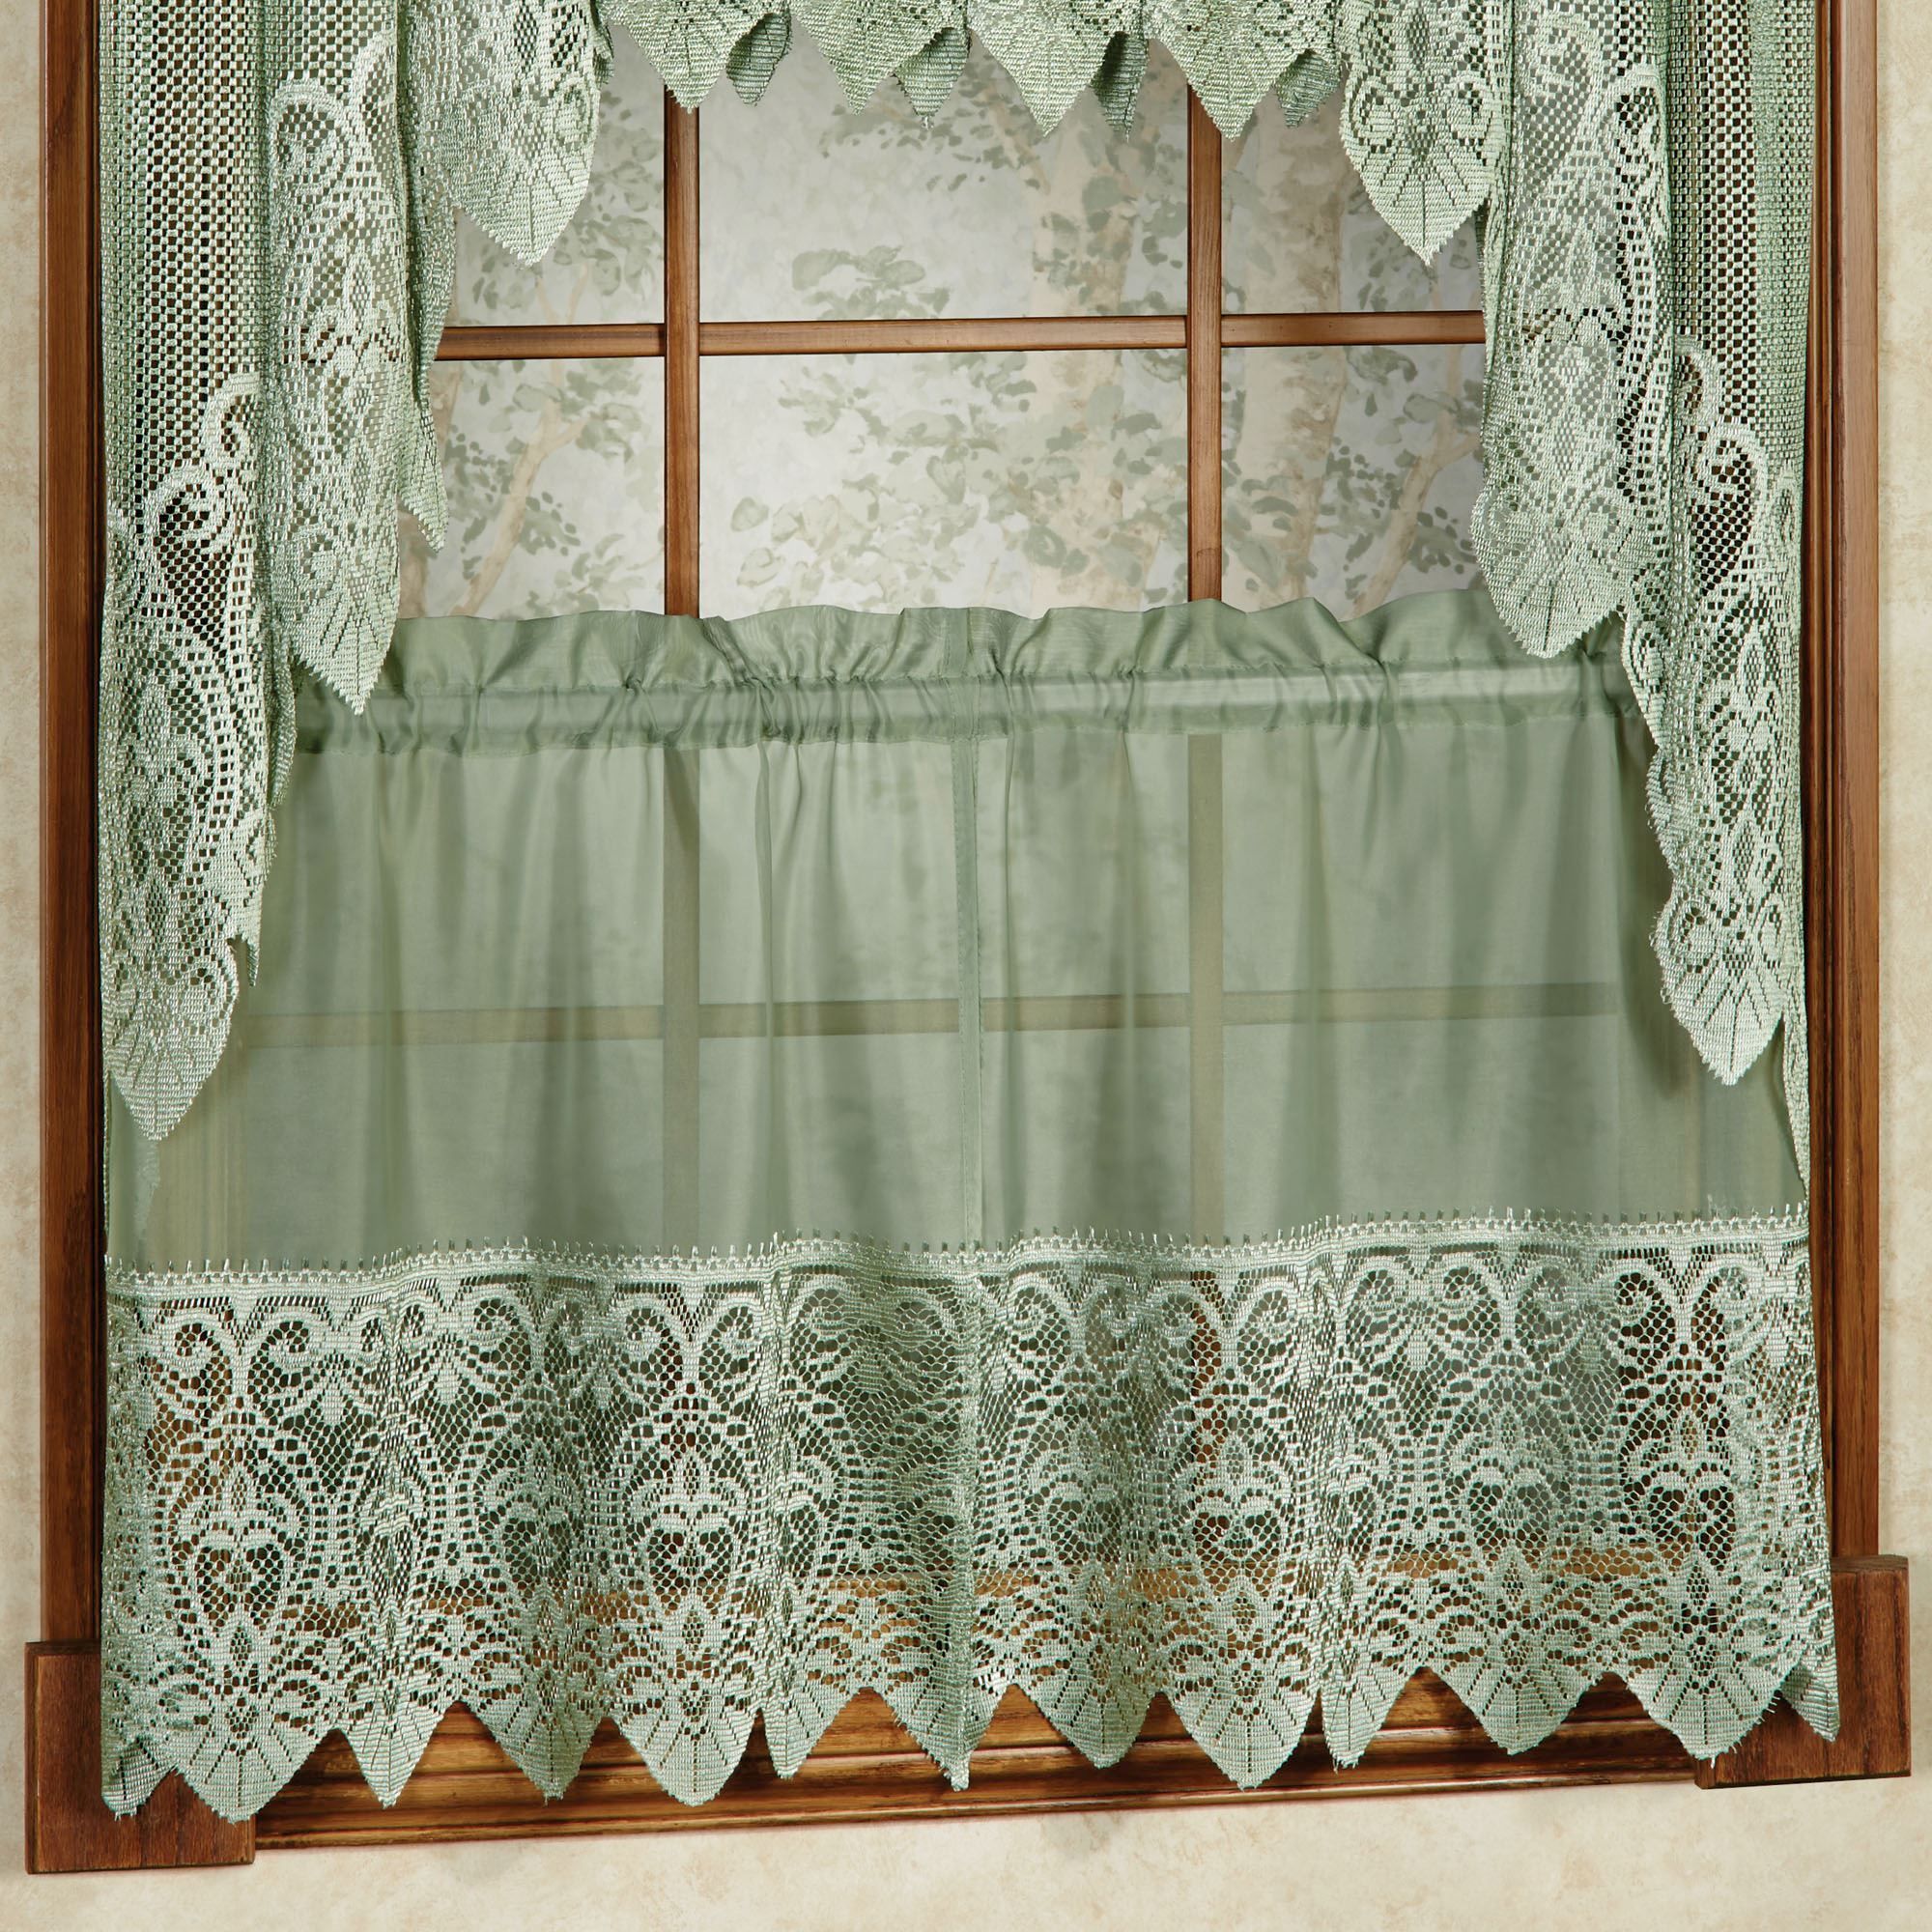 Valerie Macrame Sheer Tier Window Treatment Regarding Traditional Tailored Tier And Swag Window Curtains Sets With Ornate Flower Garden Print (View 17 of 20)